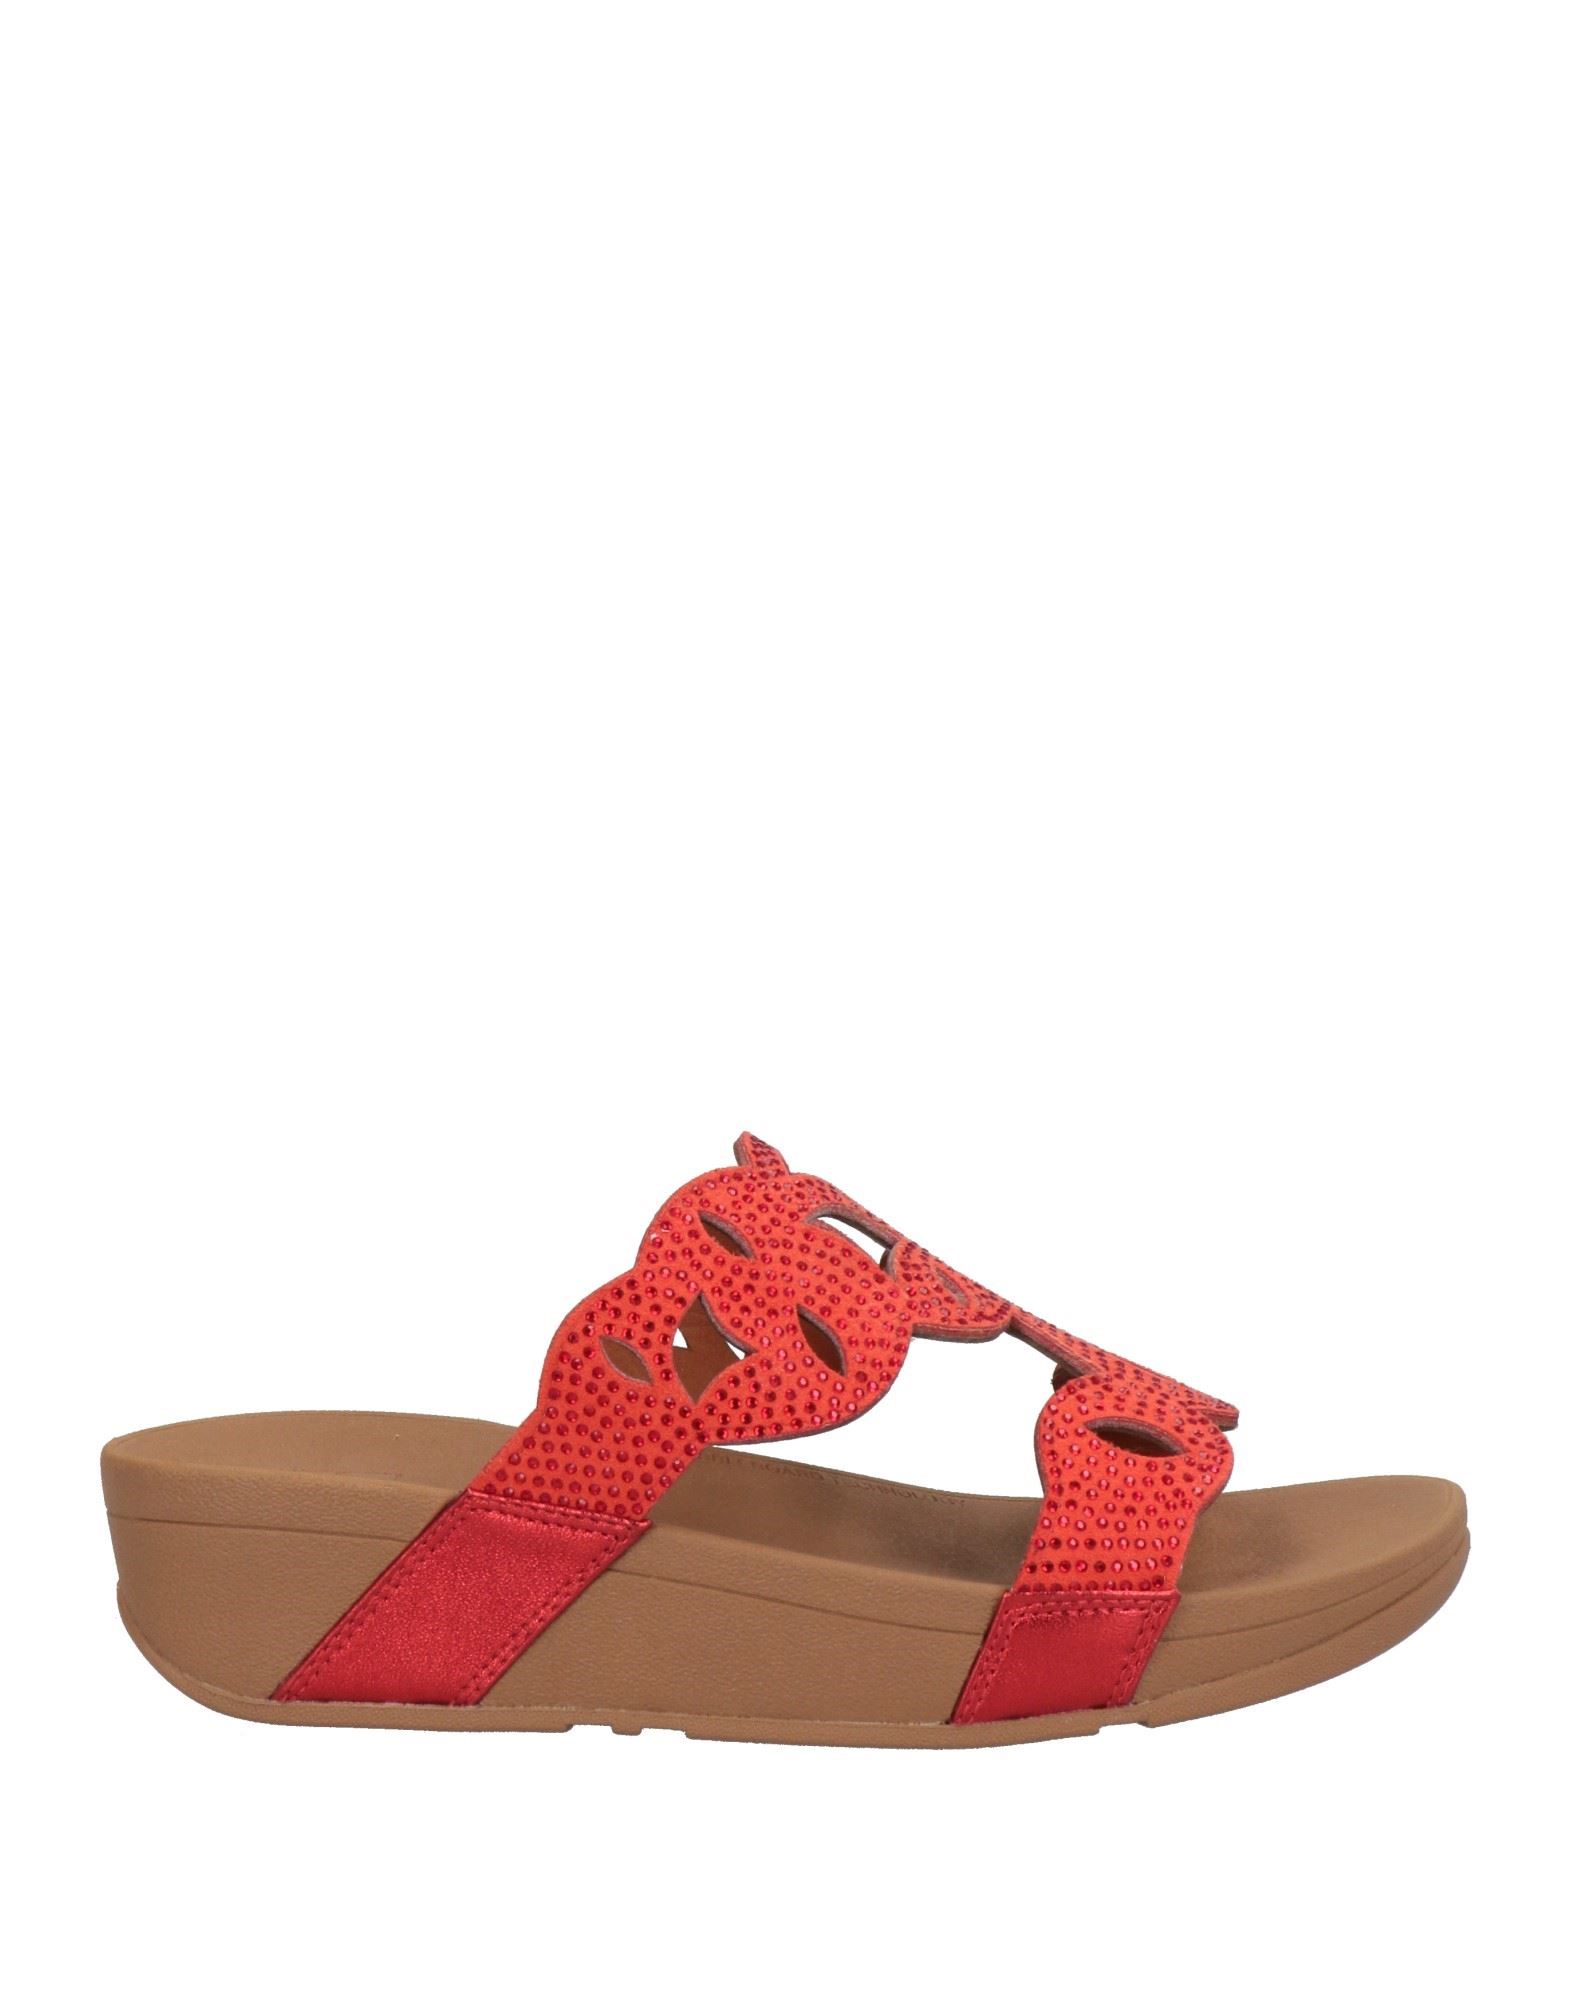 Fitflop Sandals In Red